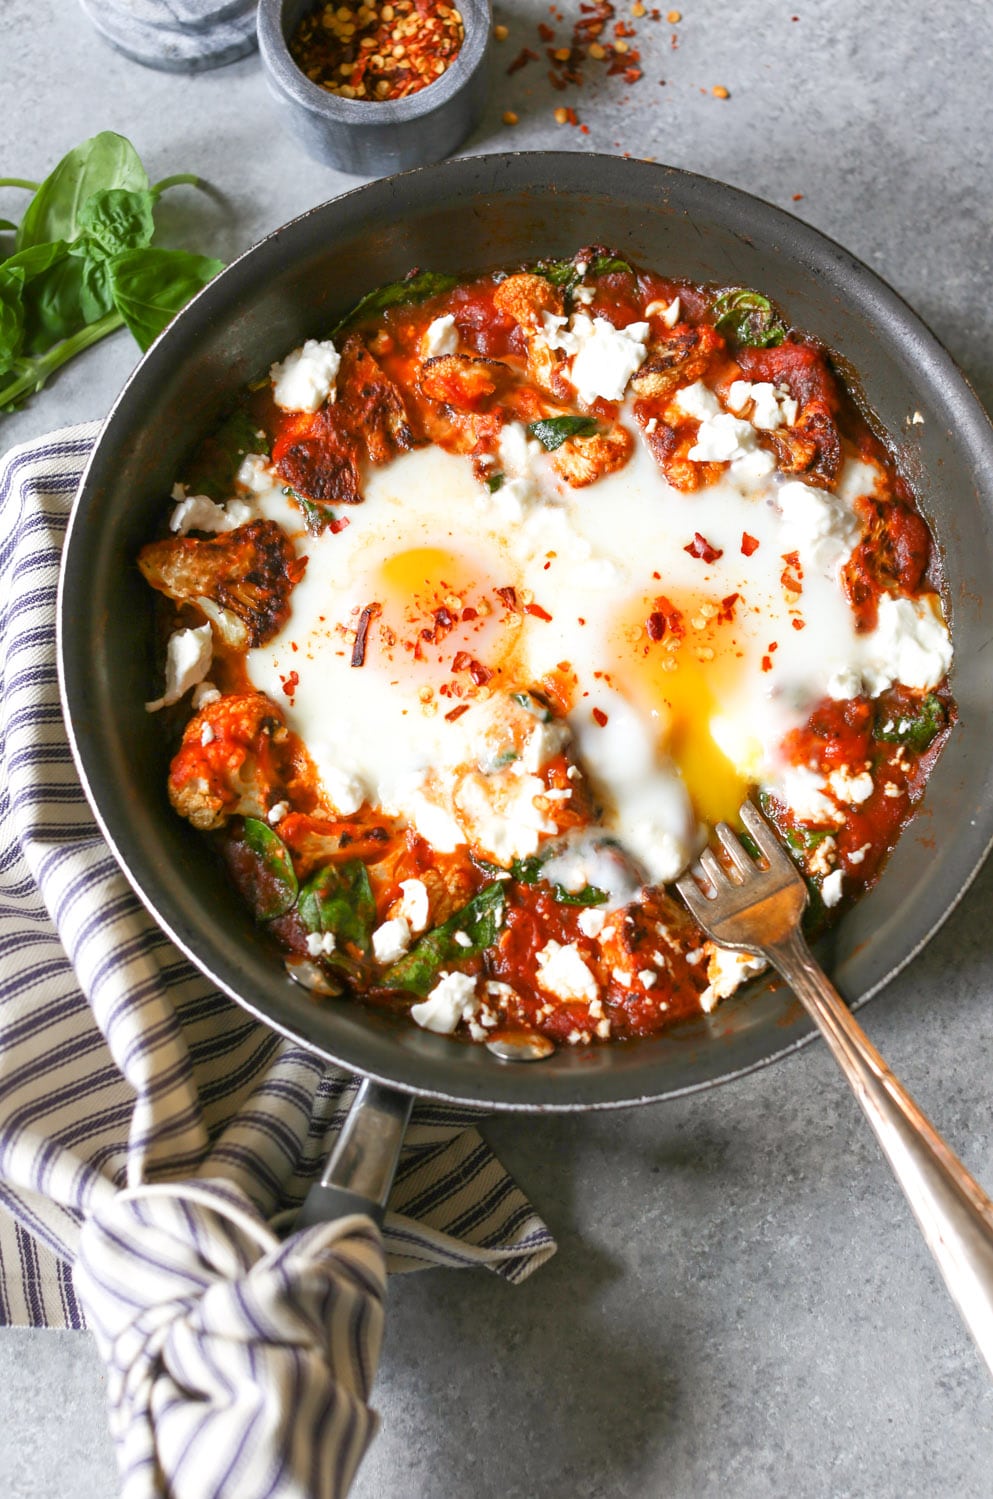 Healthy Pantry Recipes- Skillet Eggs with Roasted Cauliflower and Spinach